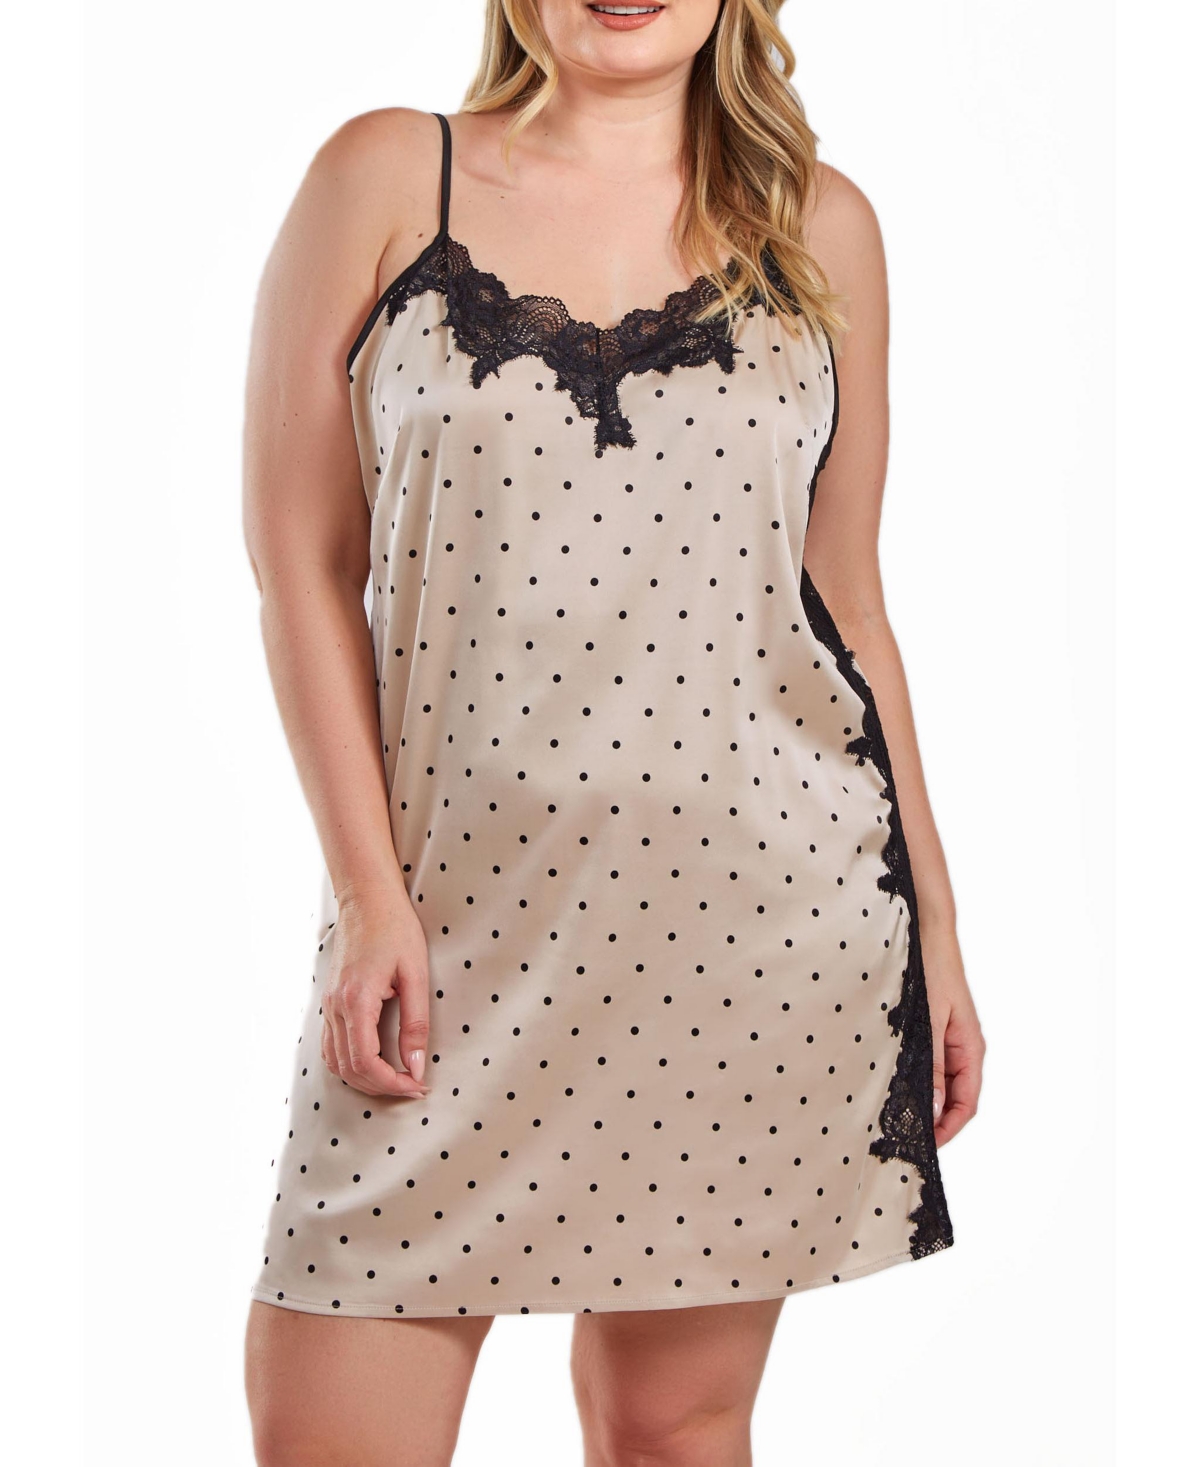 Kareen Dotted Plus Size Satin Chemise Adorned in Front and Side Lace - Beige